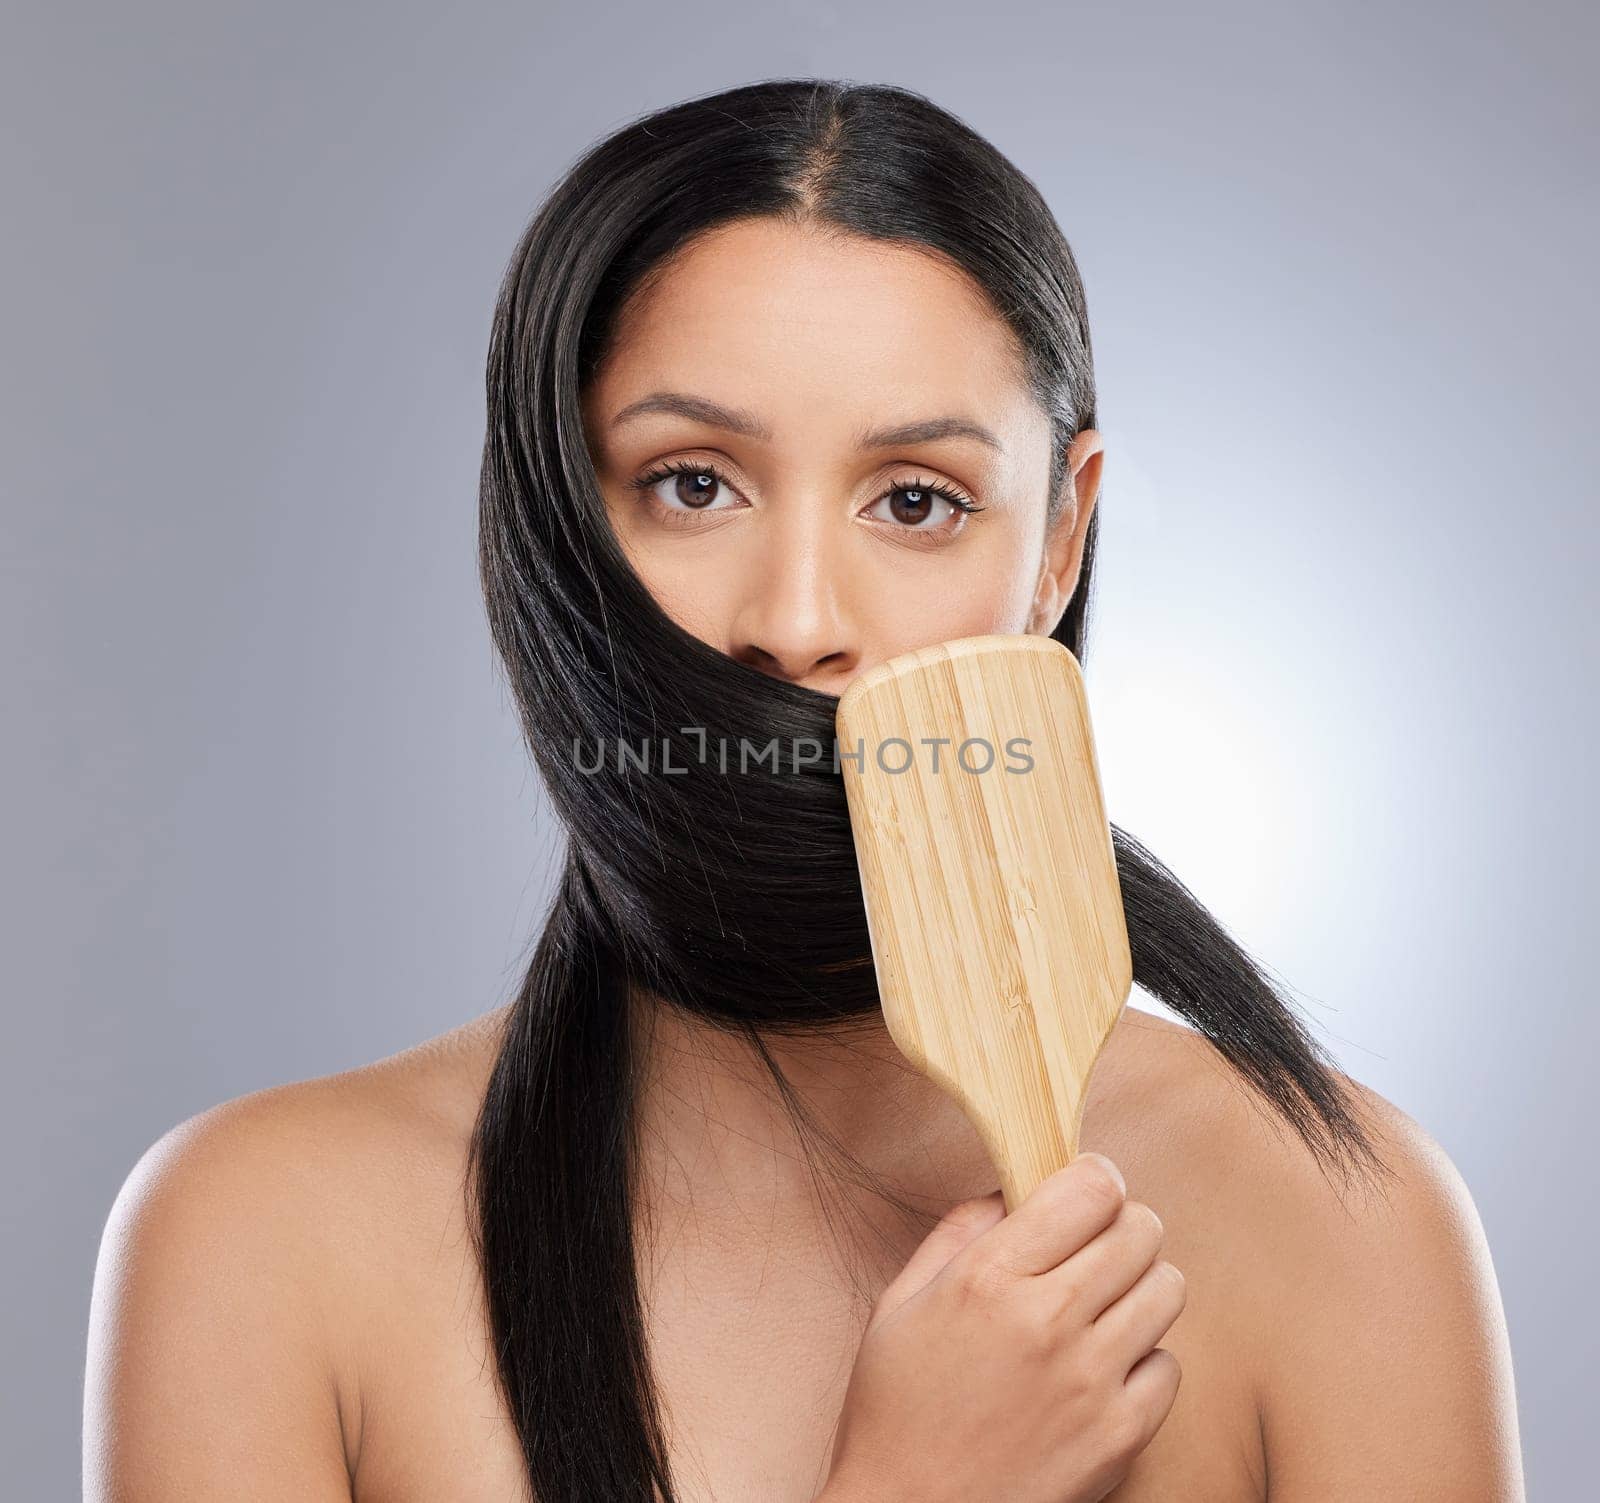 Woman, portrait and brush in studio for hair grooming, salon or style against a grey background. Female person, young model and clean beauty for brushing, haircare treatment and smooth texture.